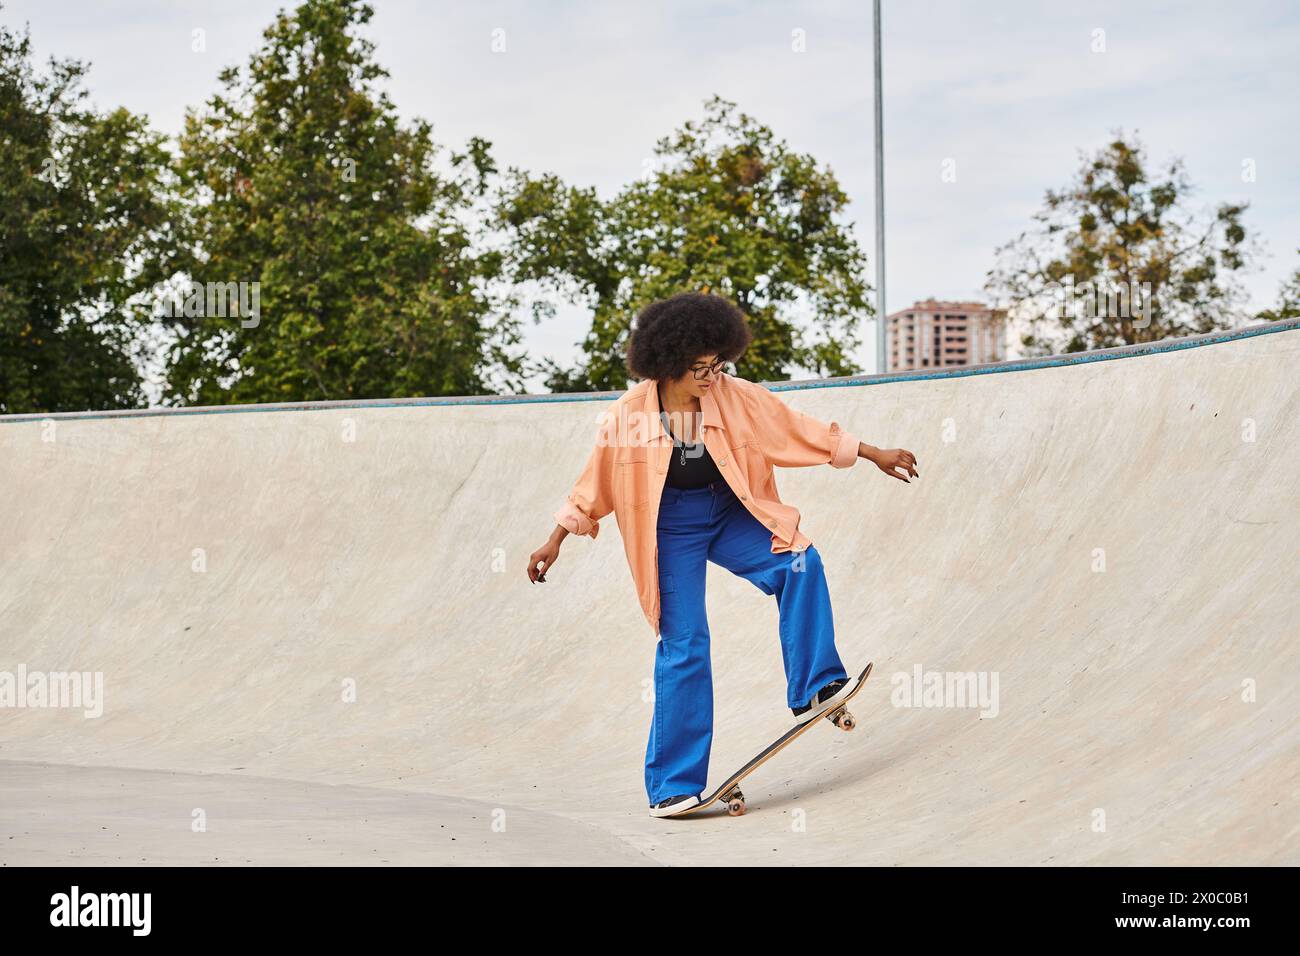 A young African American woman with curly hair boldly rides her skateboard up the side of a ramp at the skate park. Stock Photo